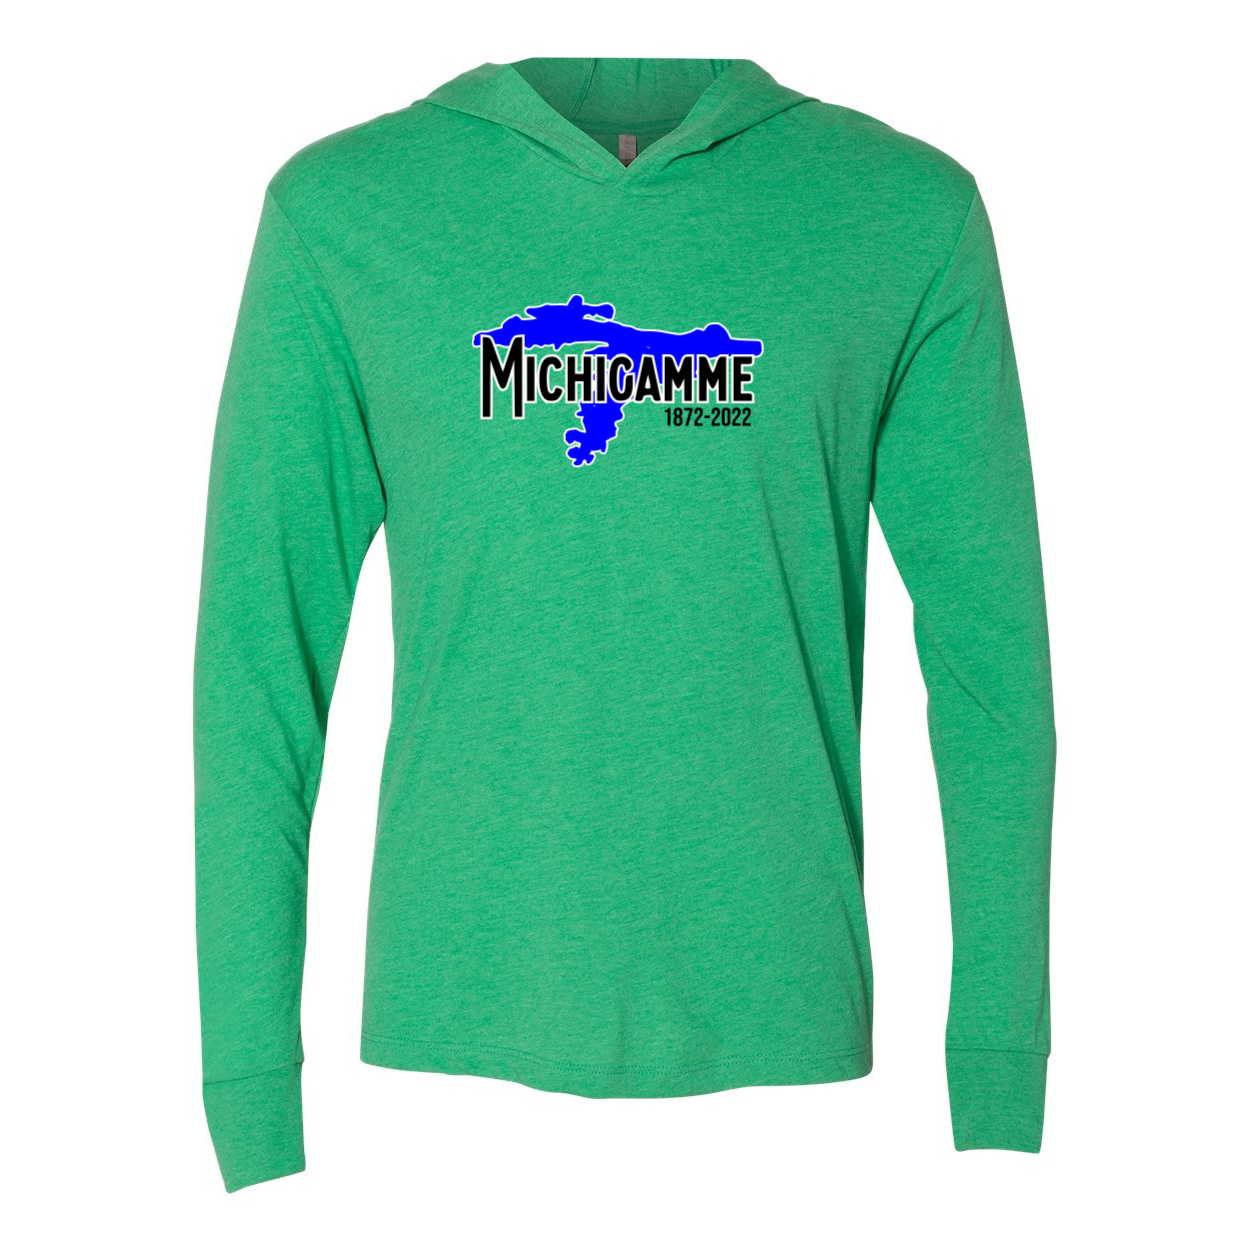 Michigamme Hooded Tee